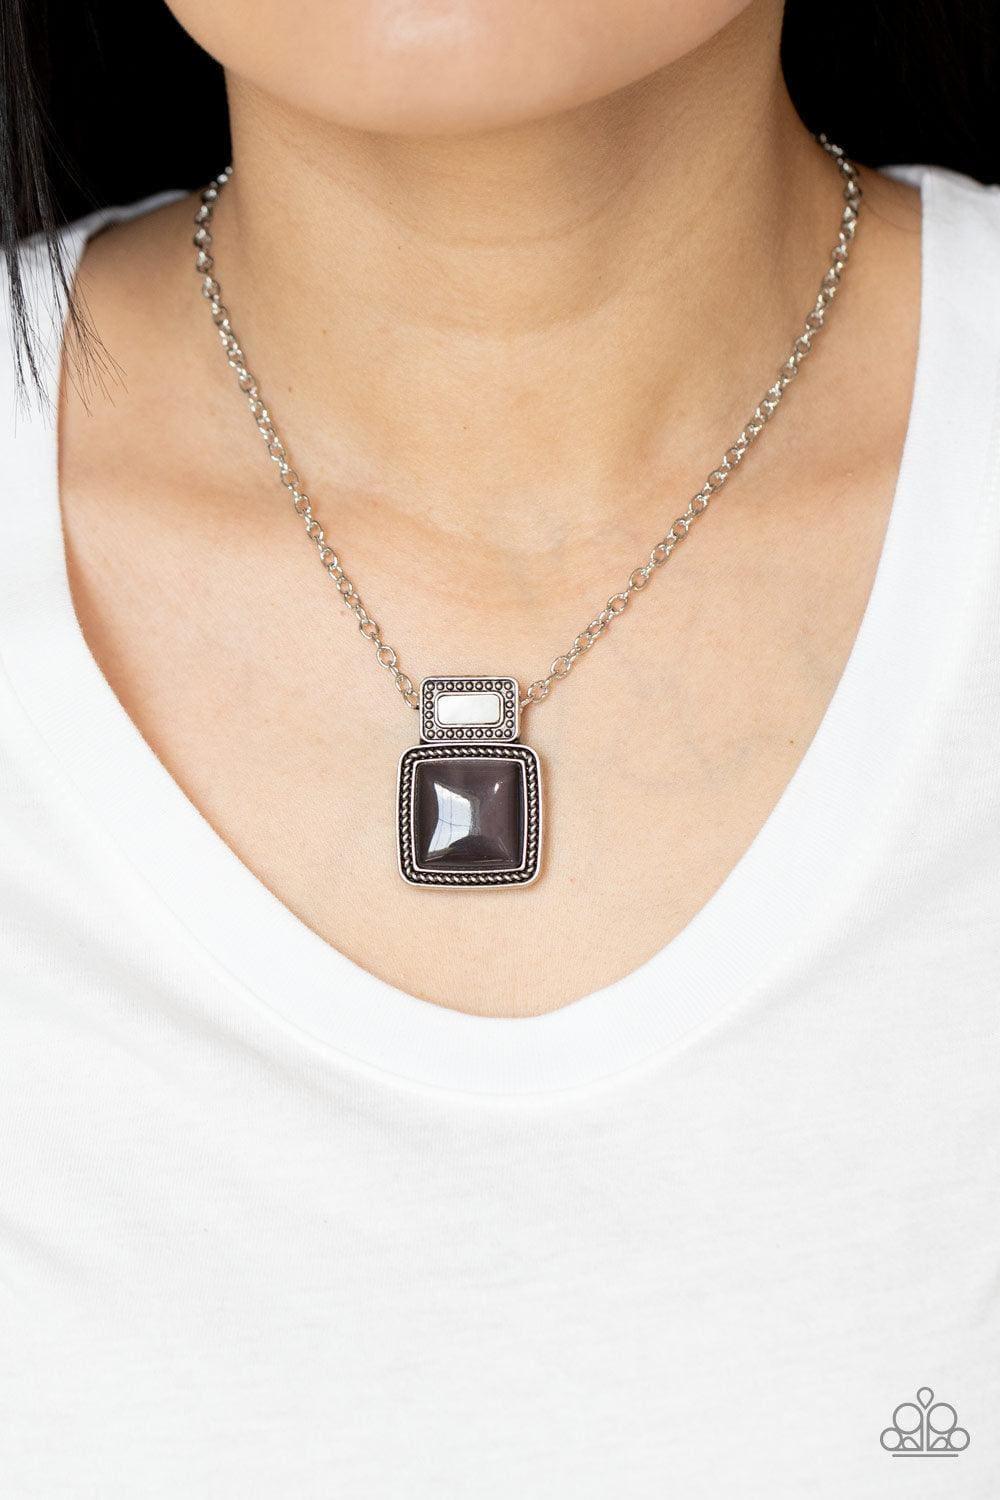 Paparazzi Accessories - Ethereally Elemental - Silver Necklace - Bling by JessieK